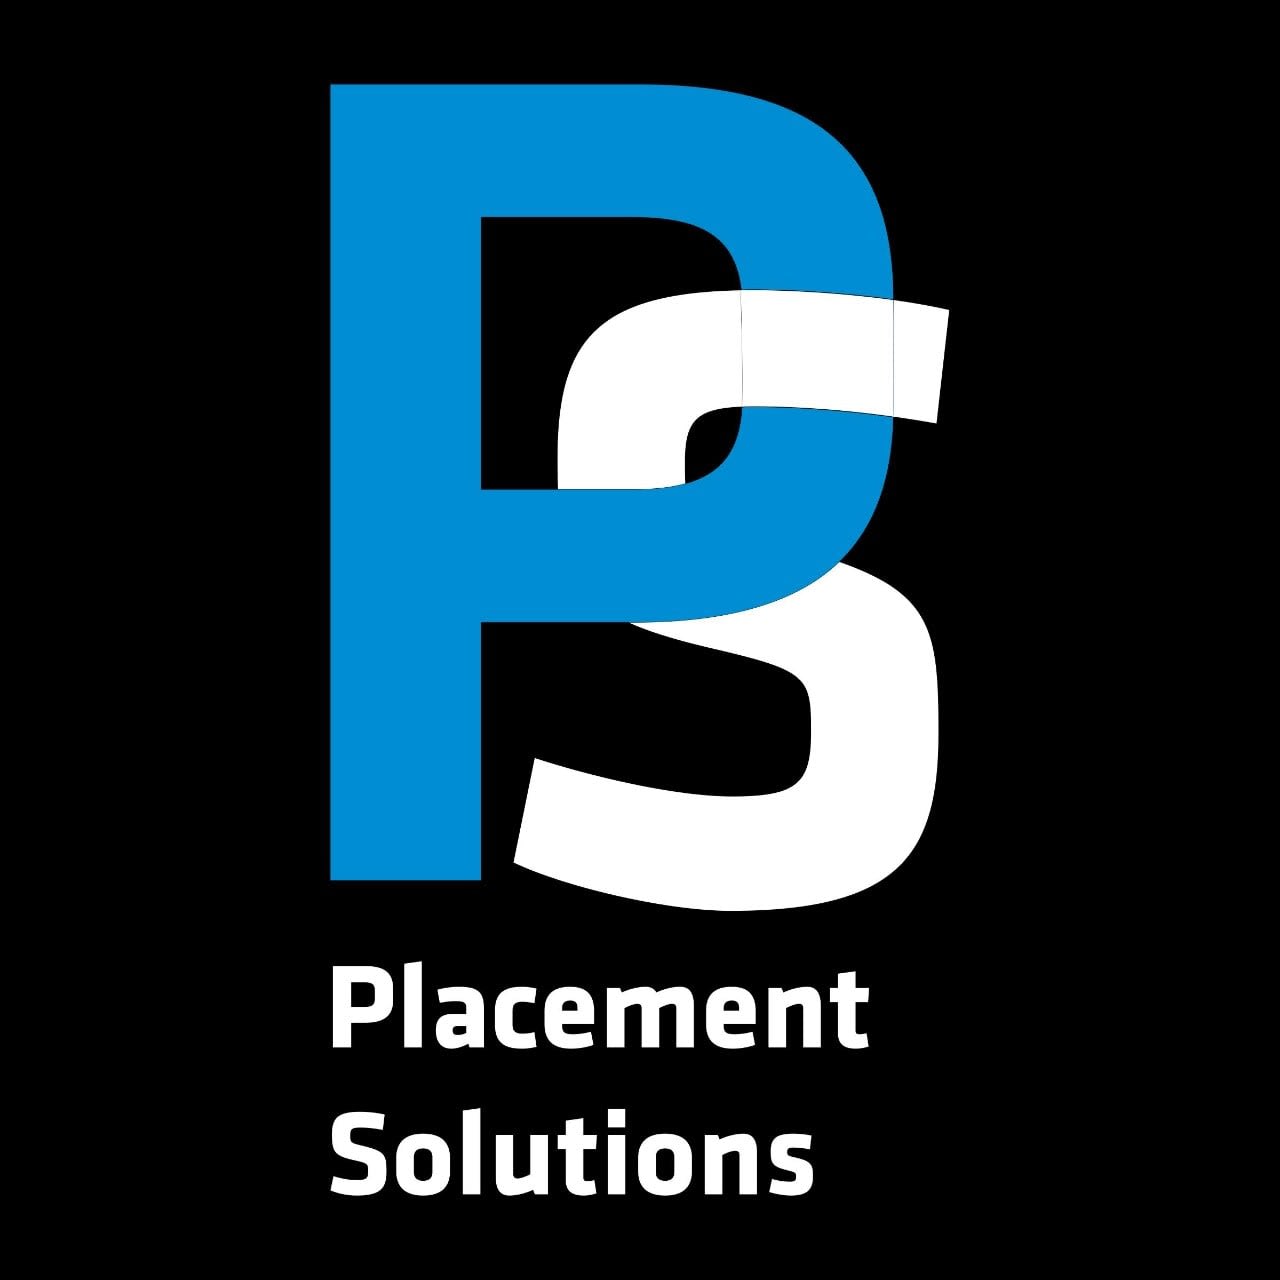 Placement Solution